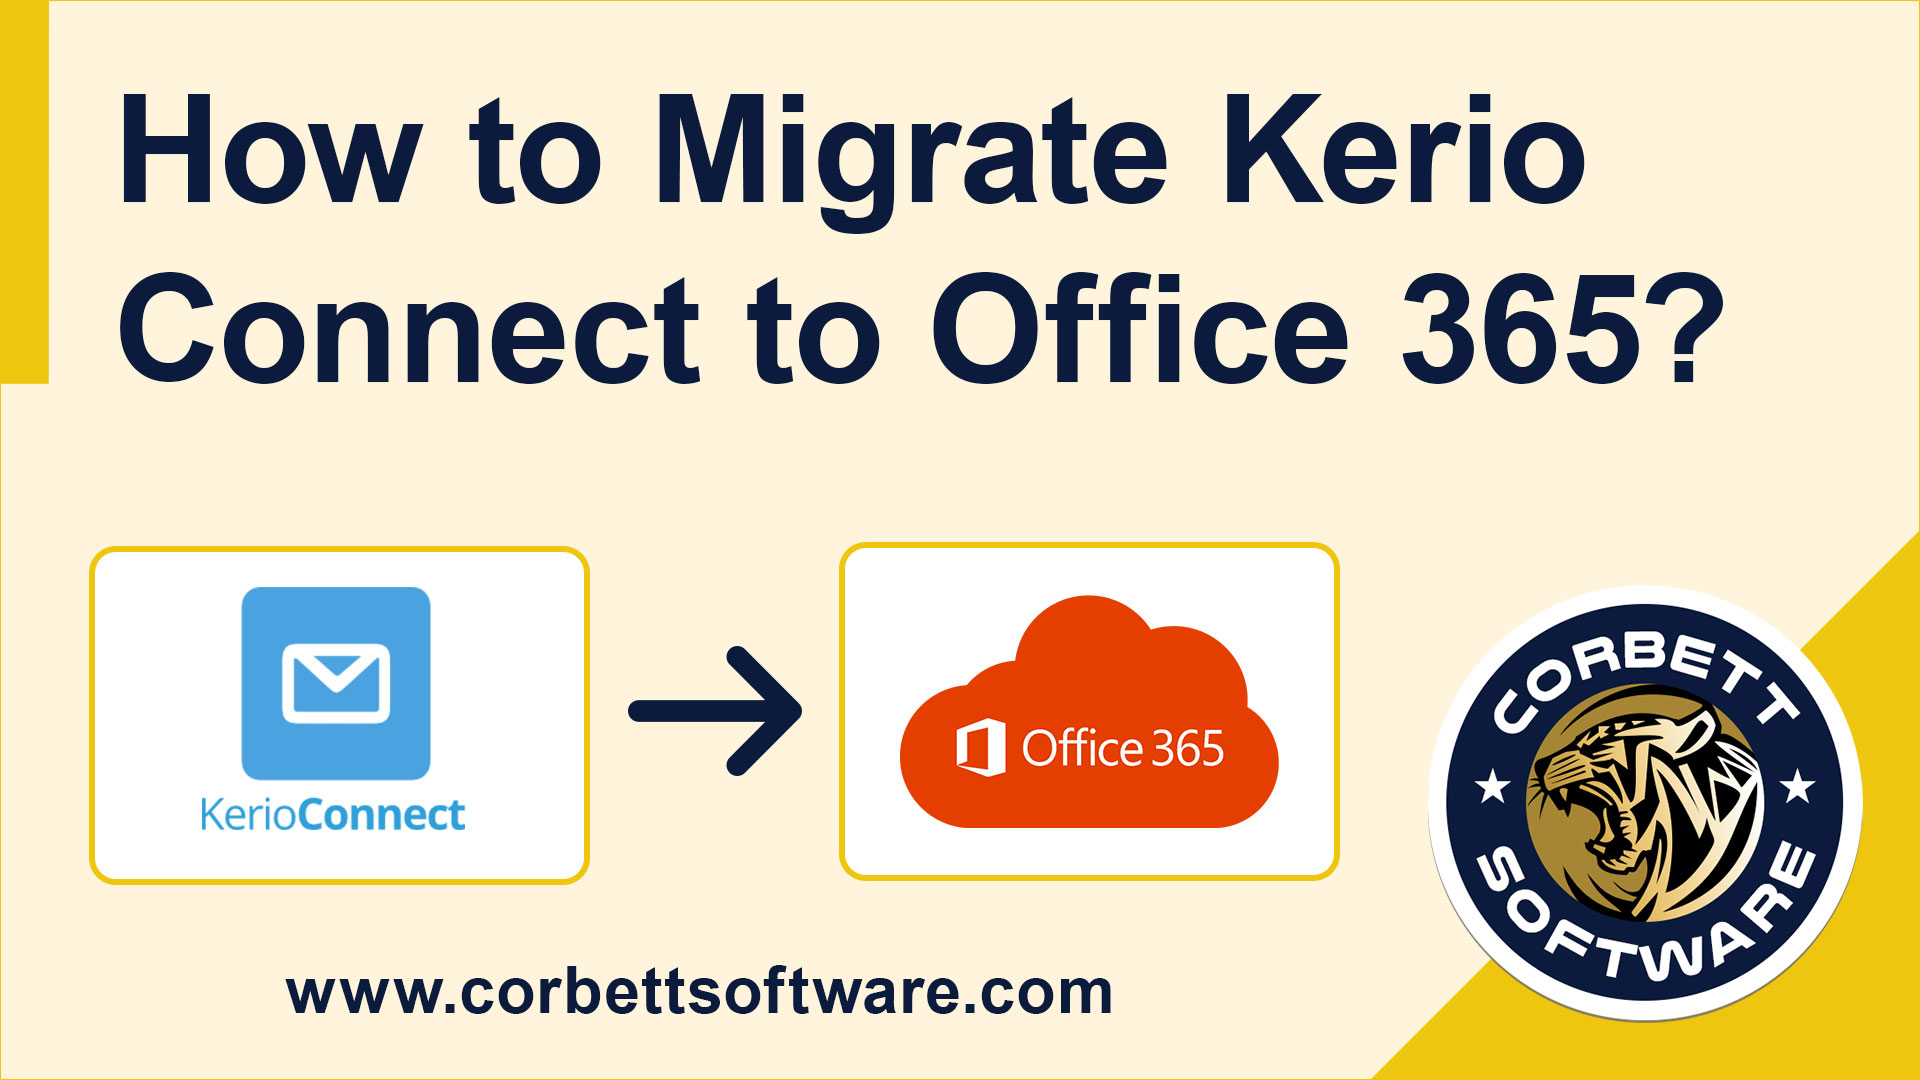 Migrate Kerio Connect to Office 365